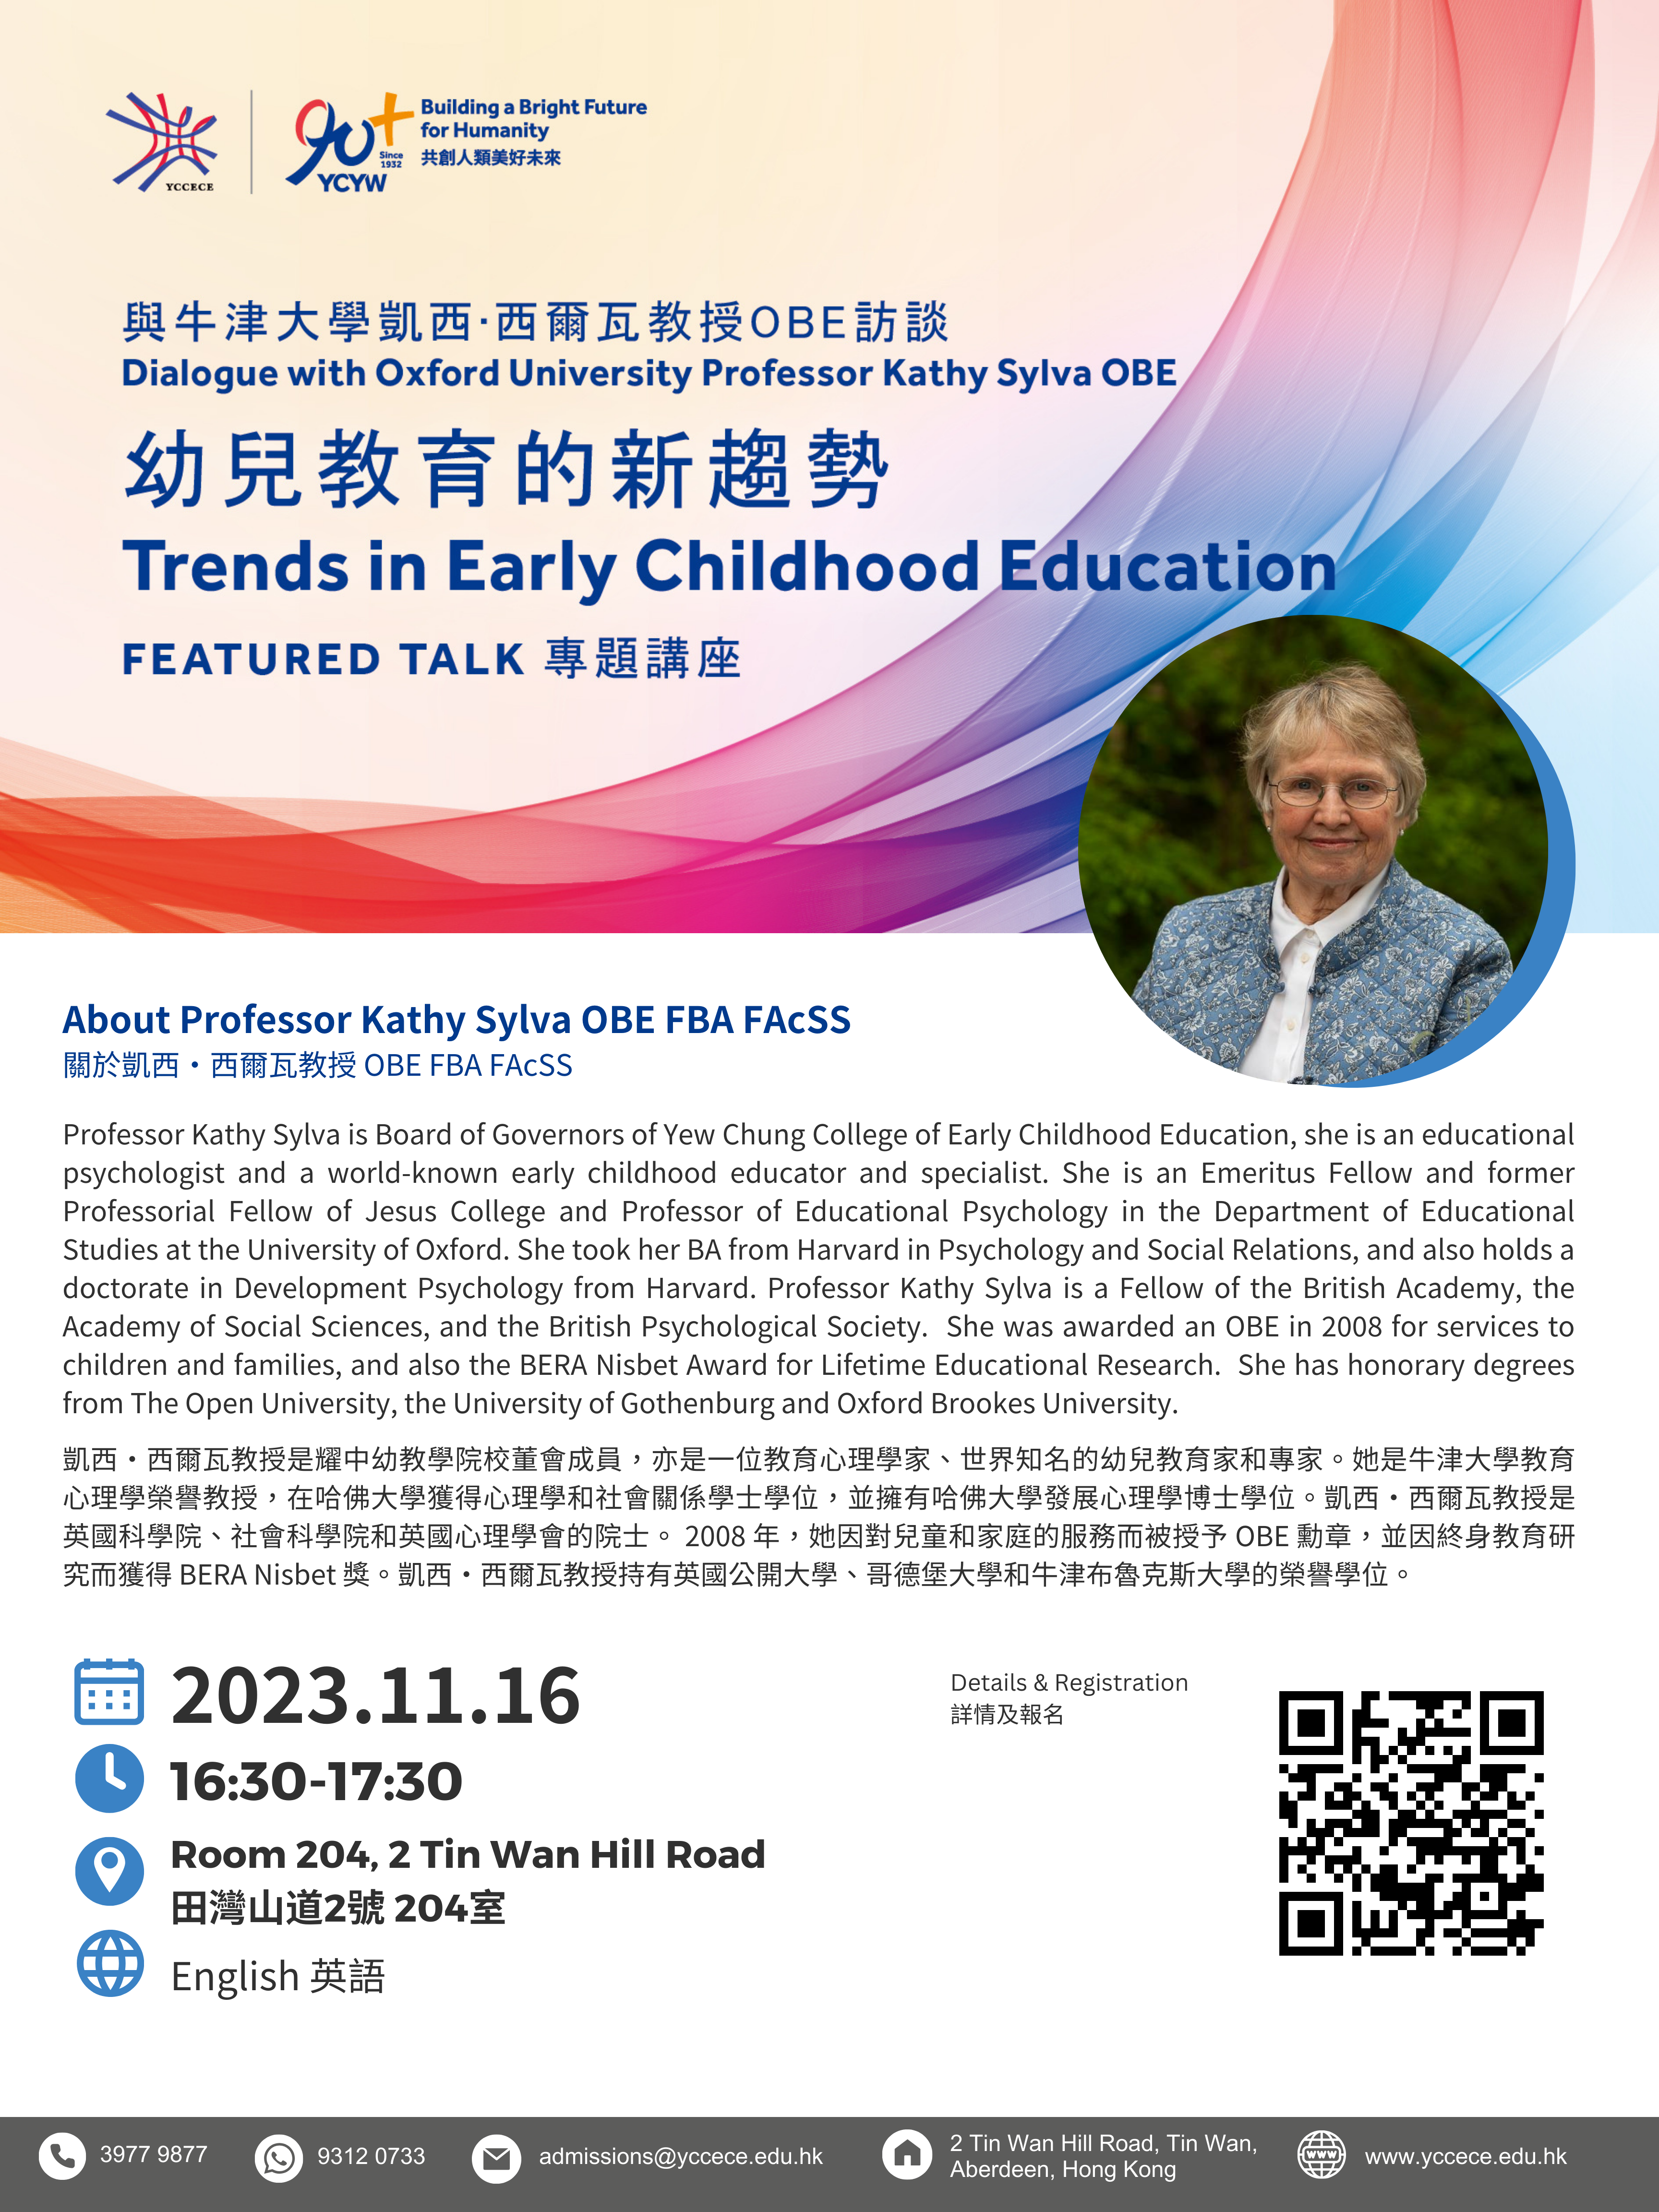 Trends in Early Childhood Education